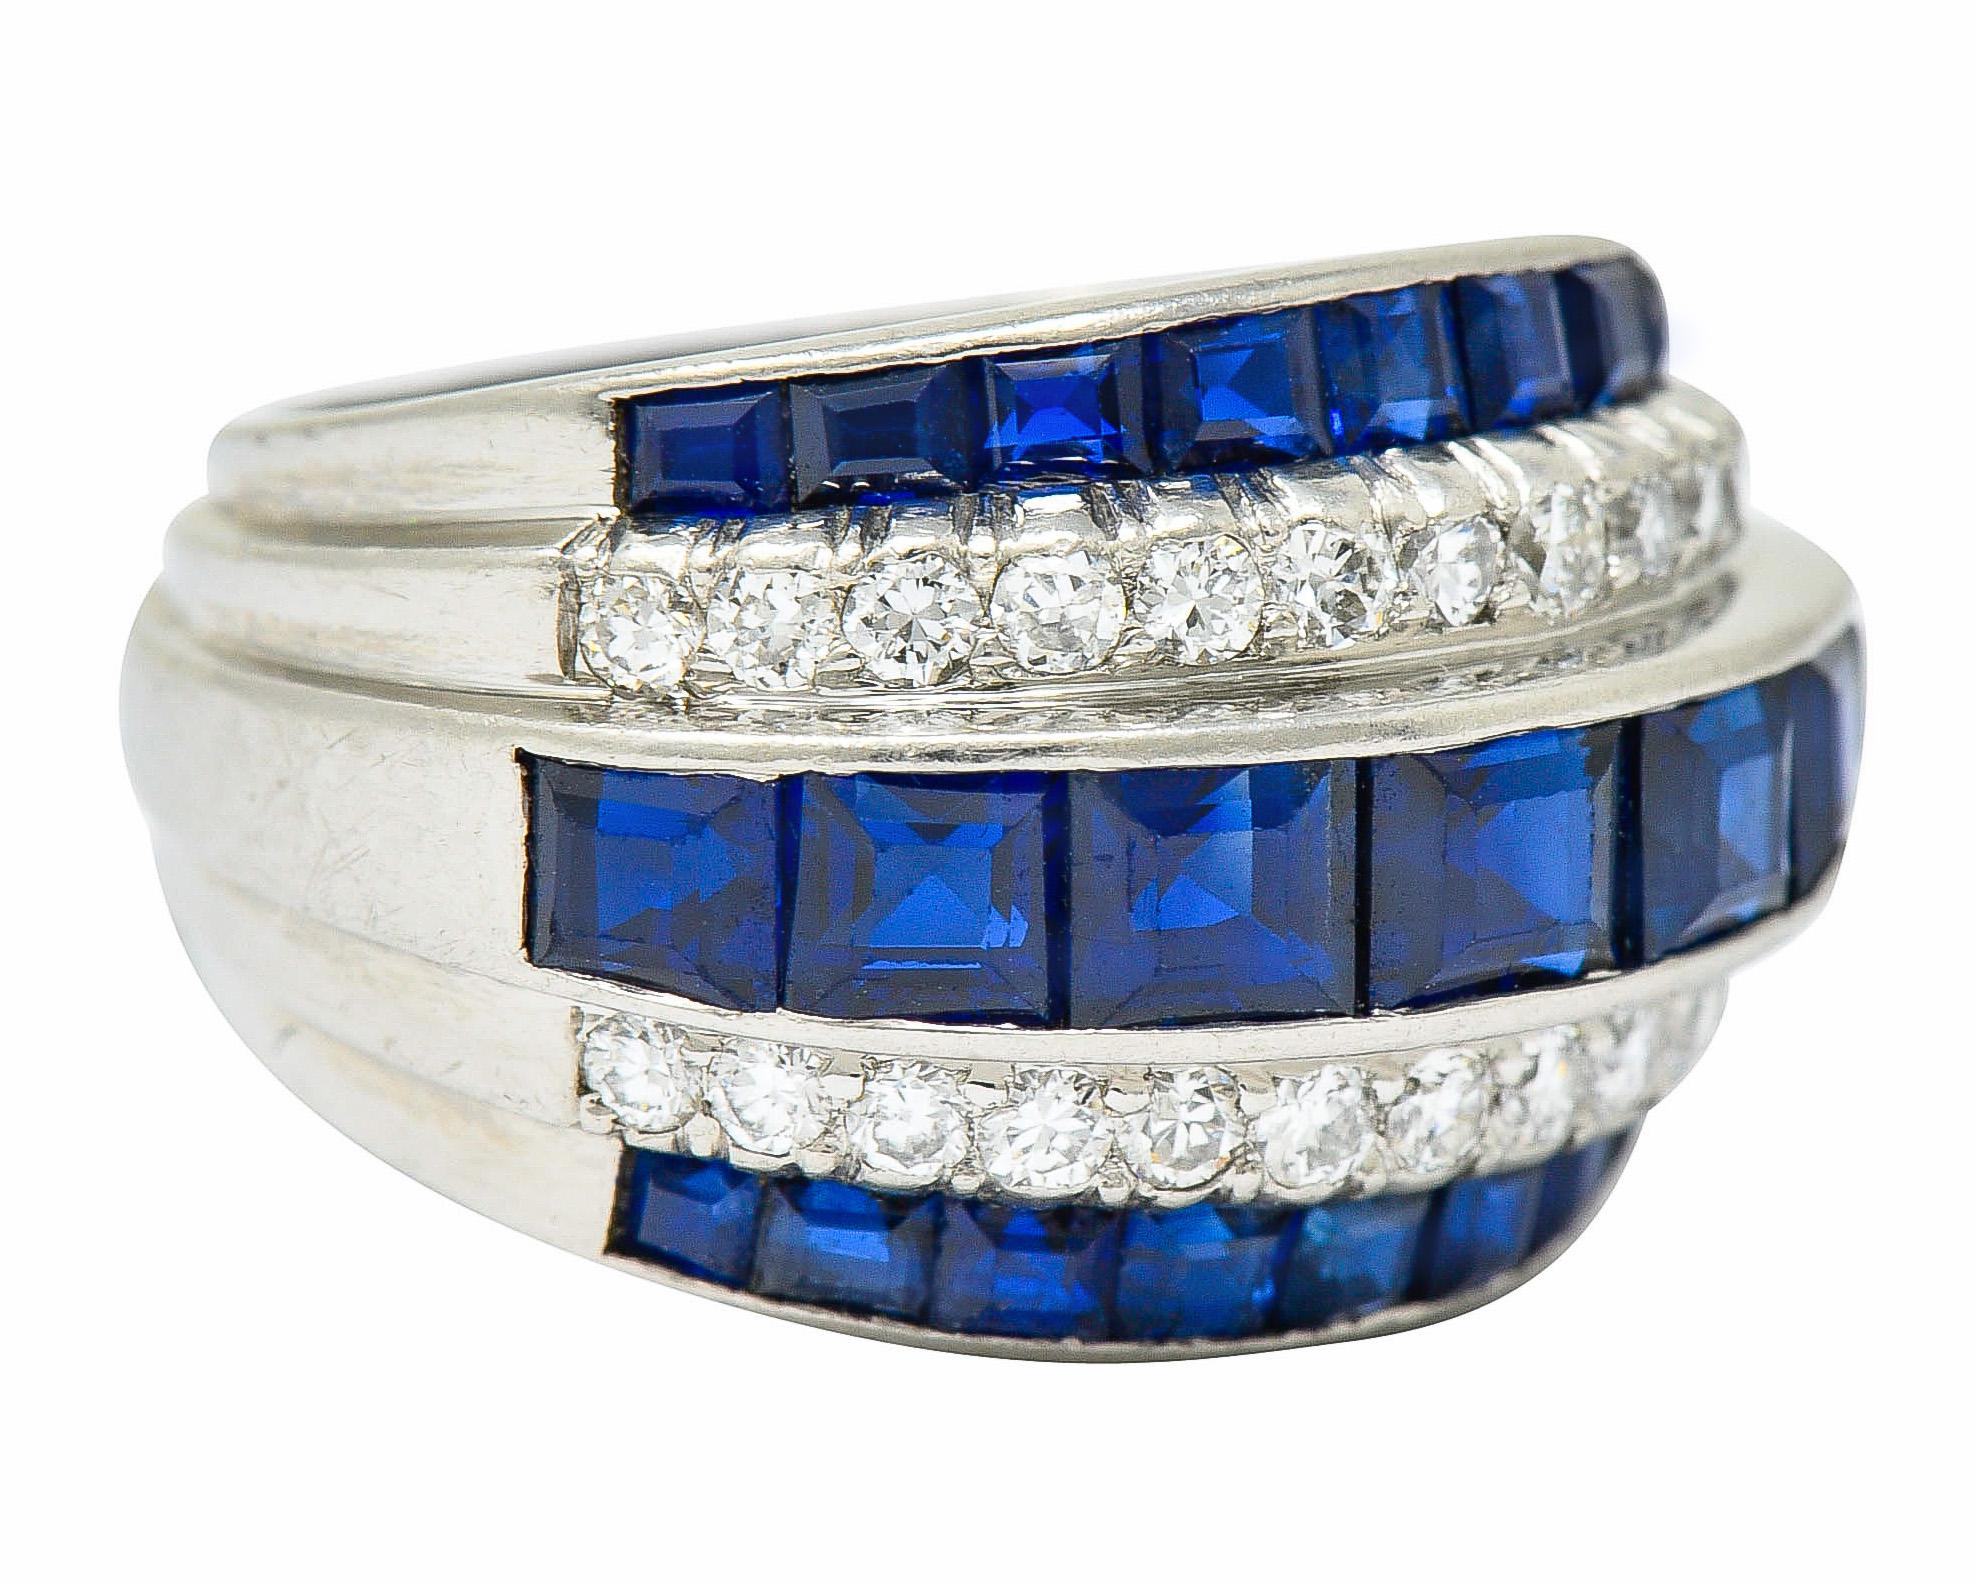 Wide band ring is comprised of five rows of sapphires and diamonds, alternating

Square cut sapphires are a very well-matched medium-dark blue and weigh in total approximately 3.25 carats

Round brilliant cut diamonds weigh in total approximately